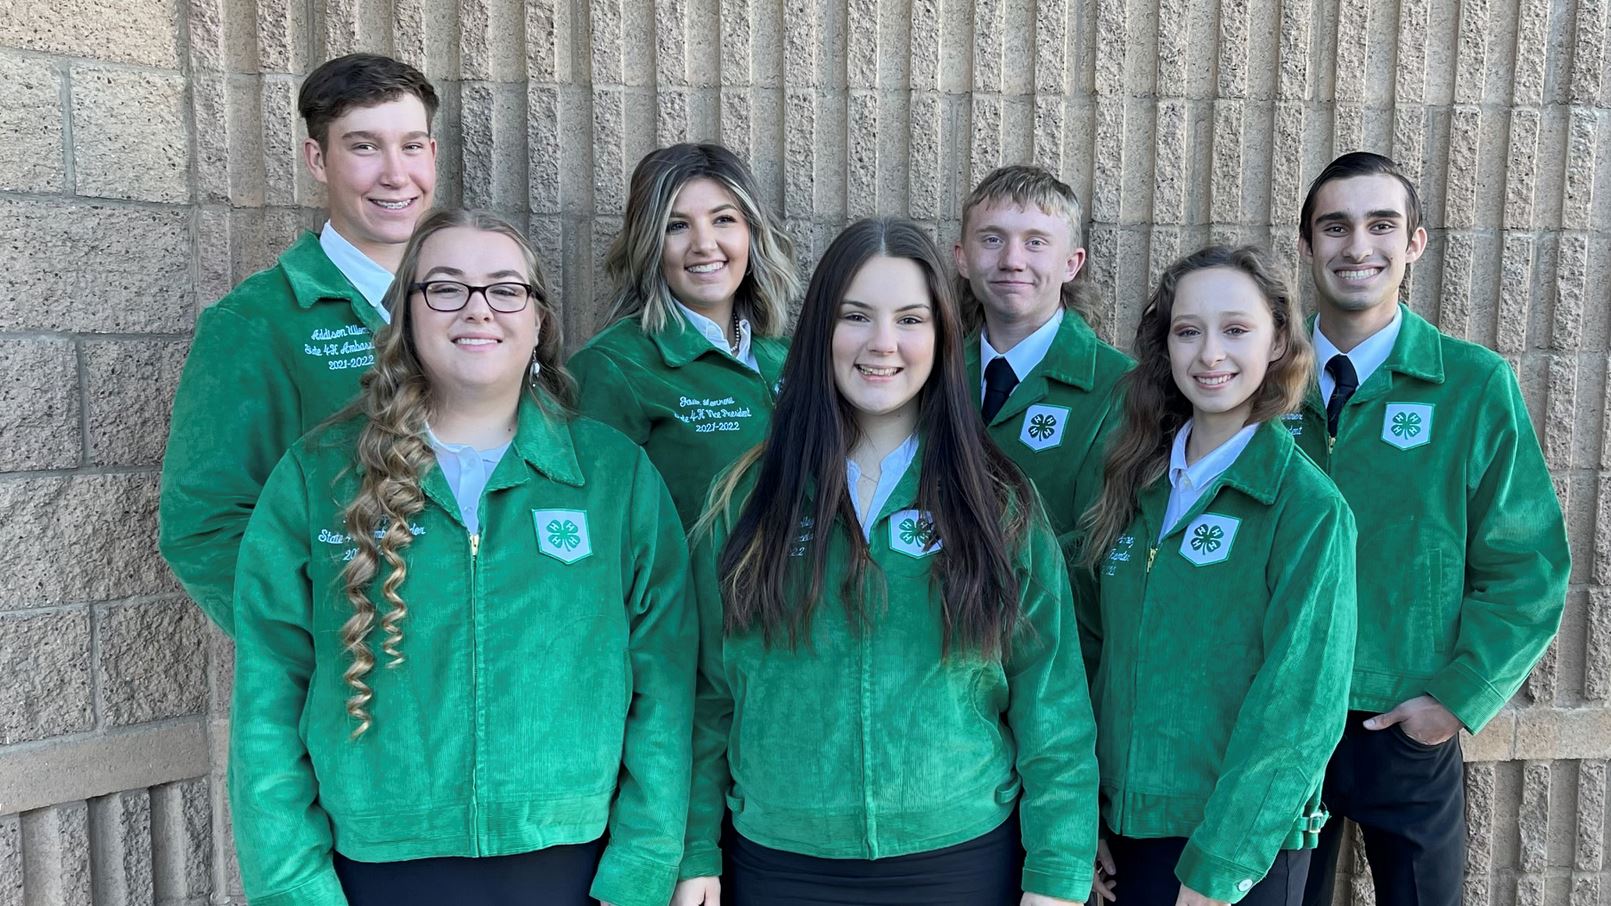 4-H program encourages growth, leadership of youth statewide